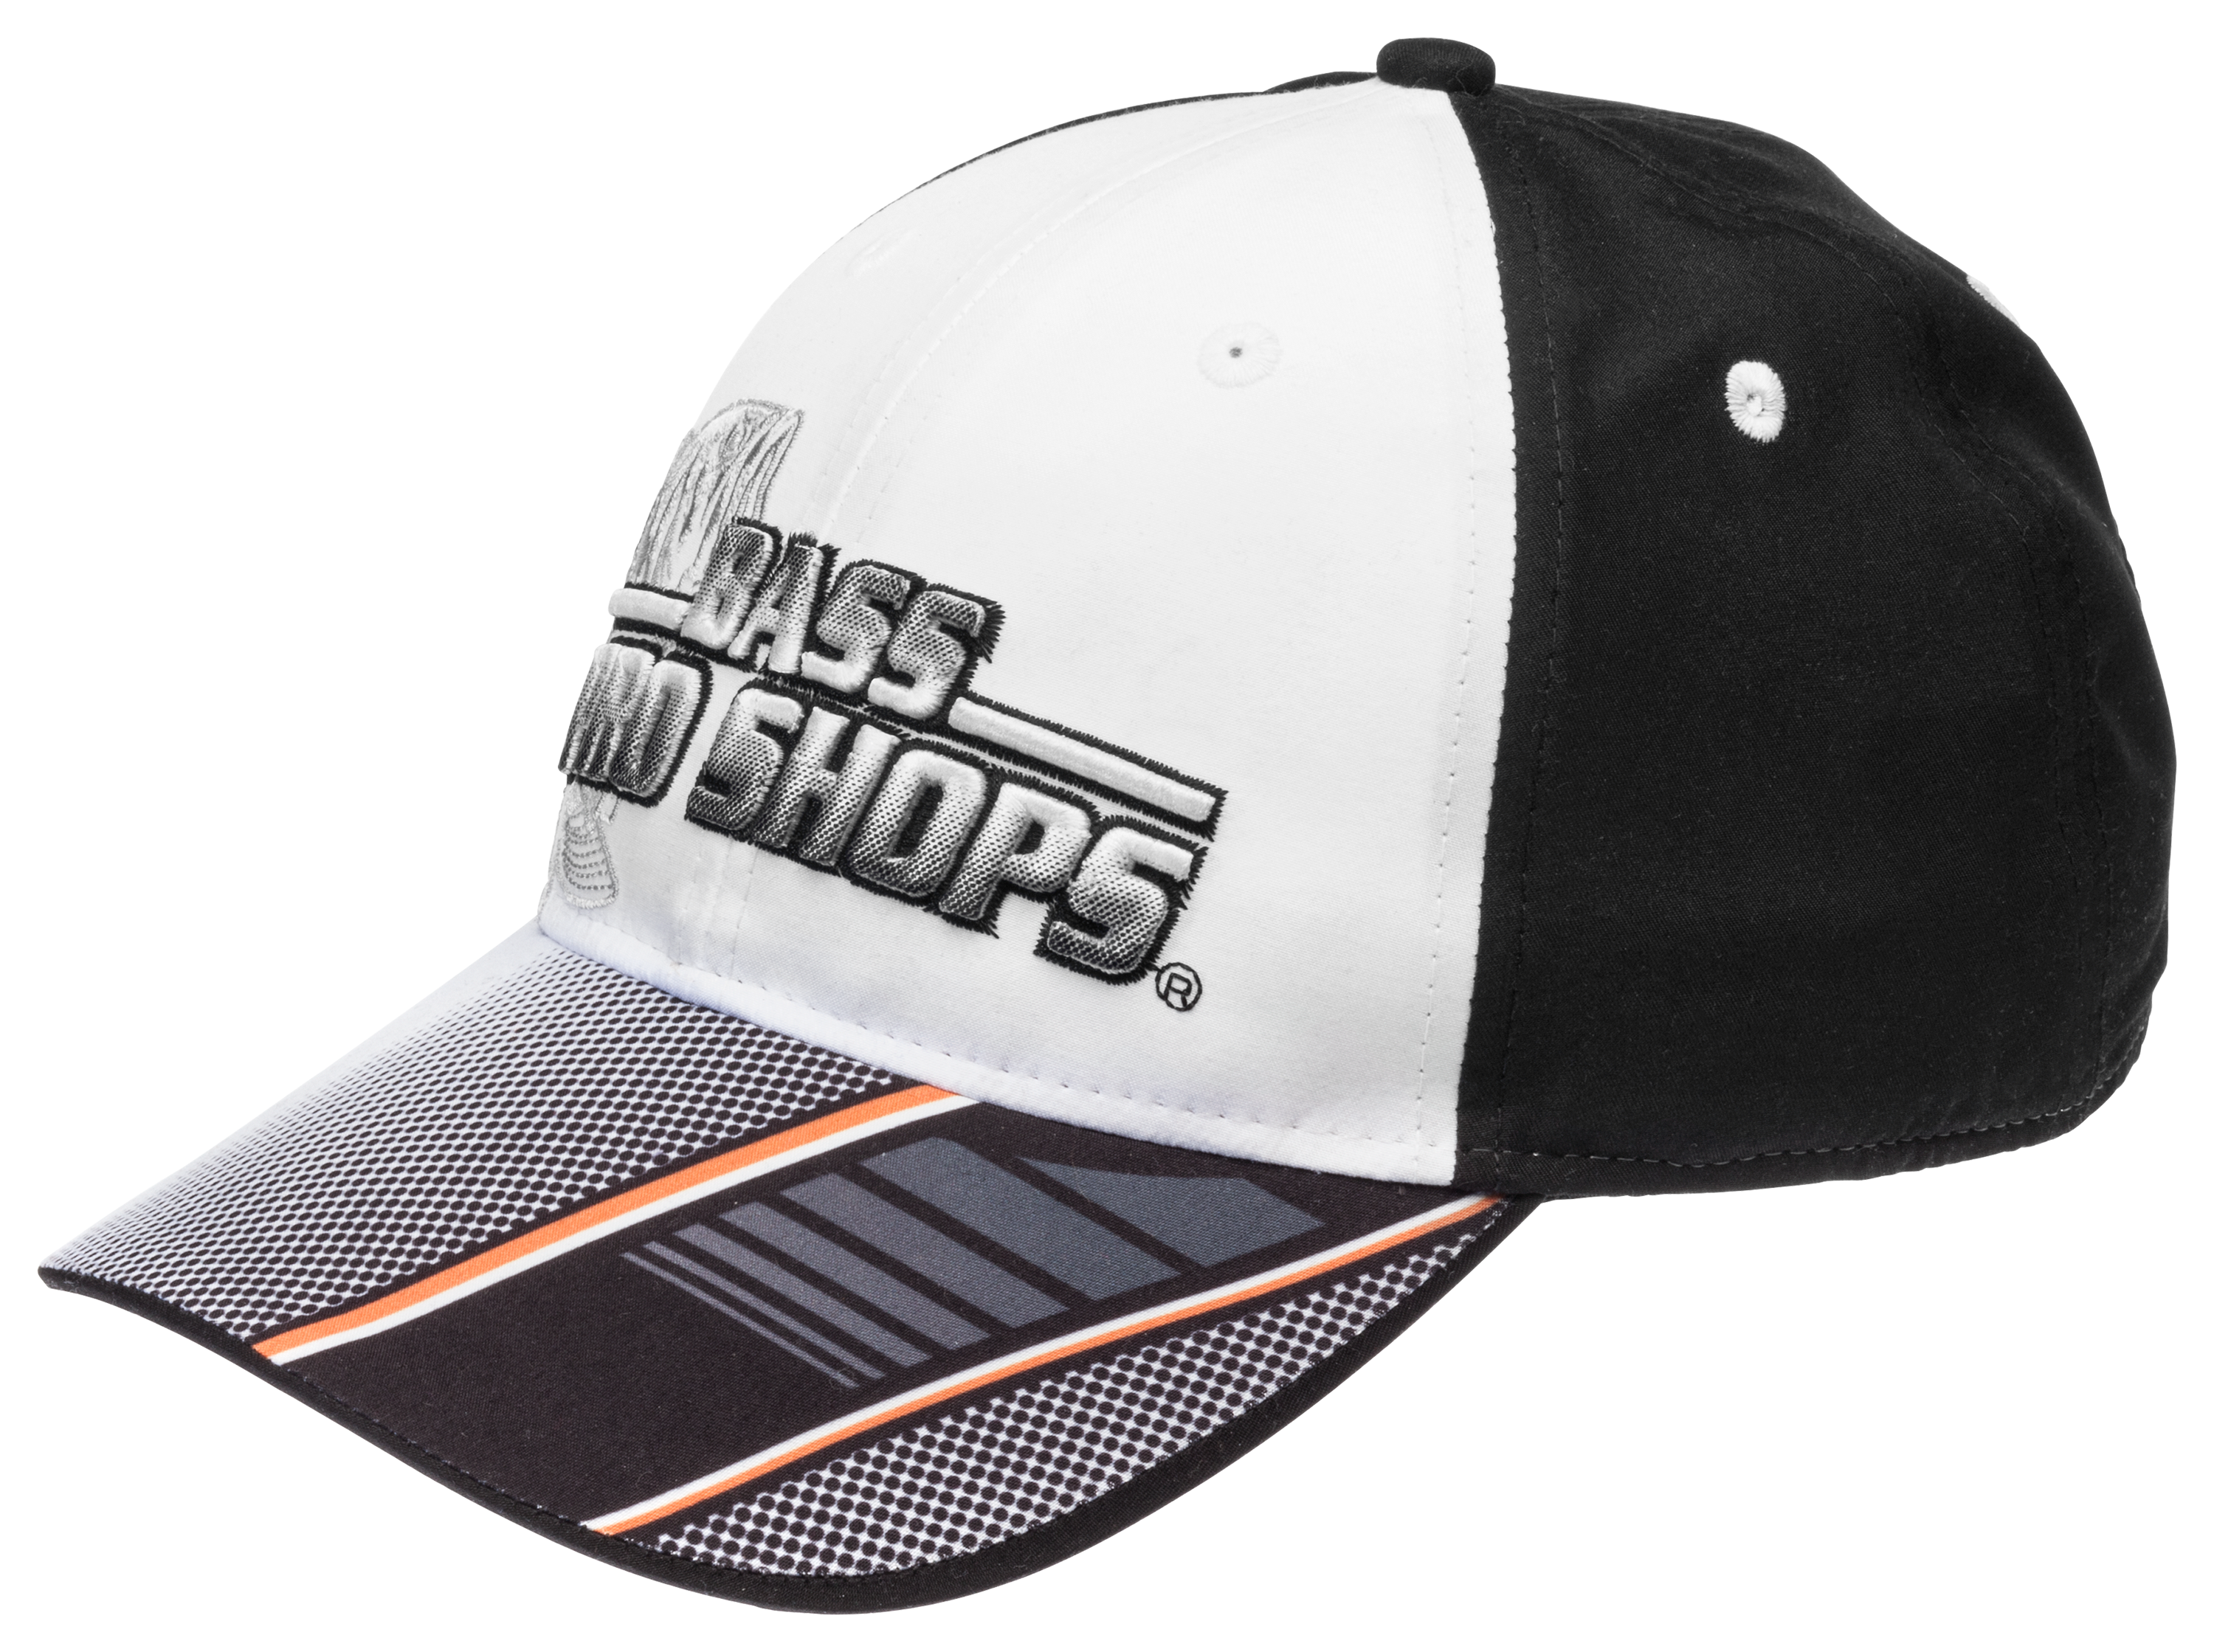 Bass Pro Shops Black and White Cap